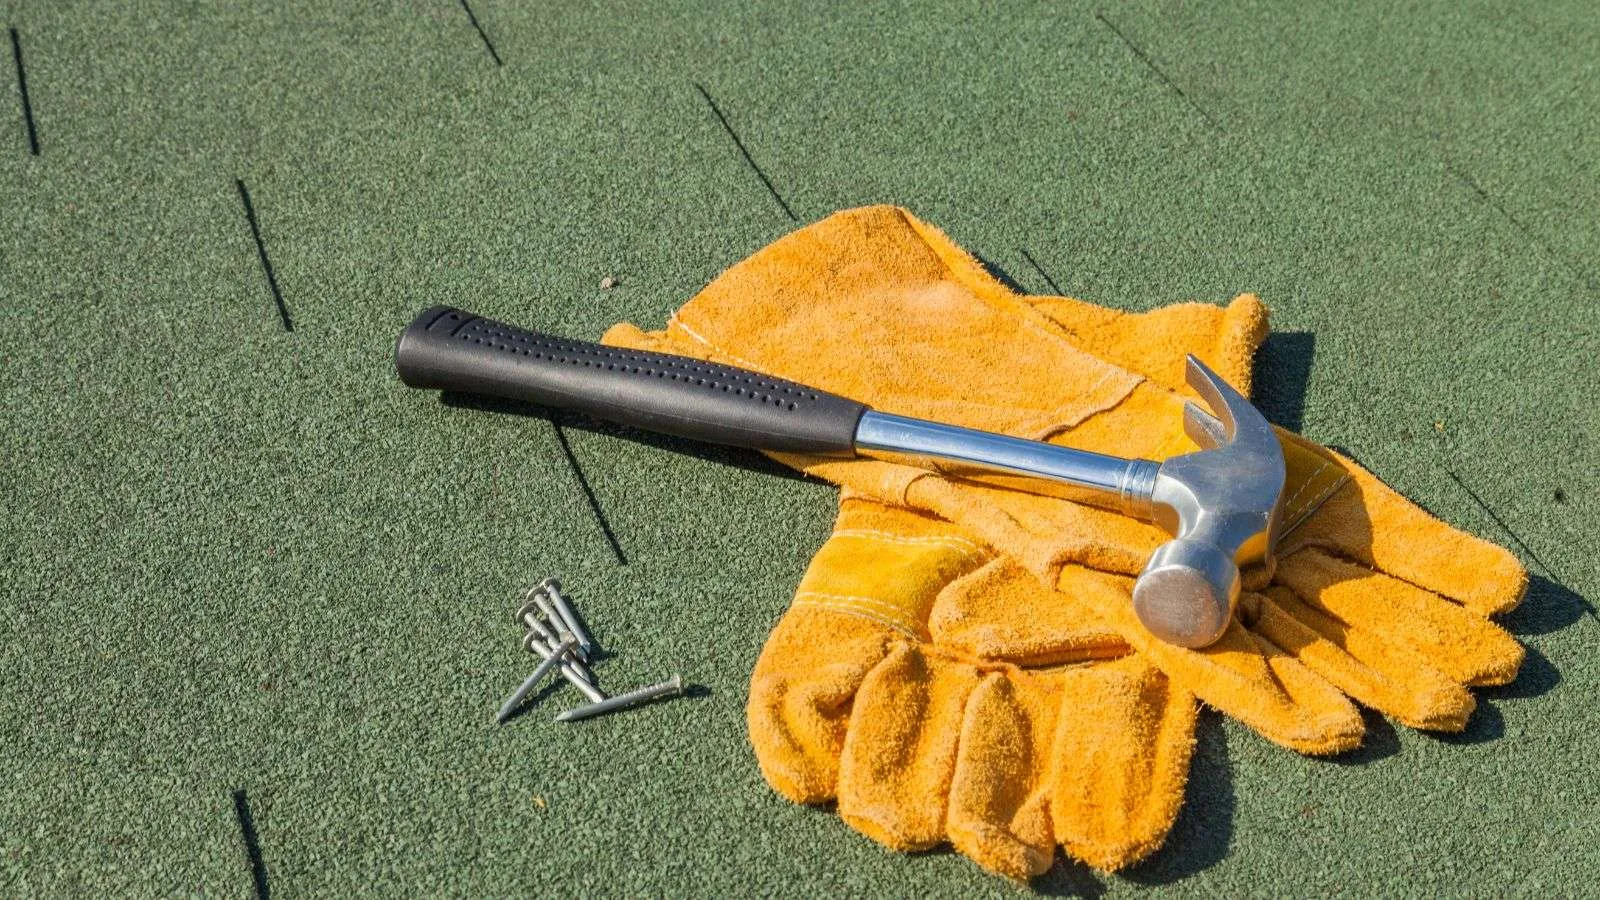 Why is roofing hammer maintenance important - bighomeprojects.com